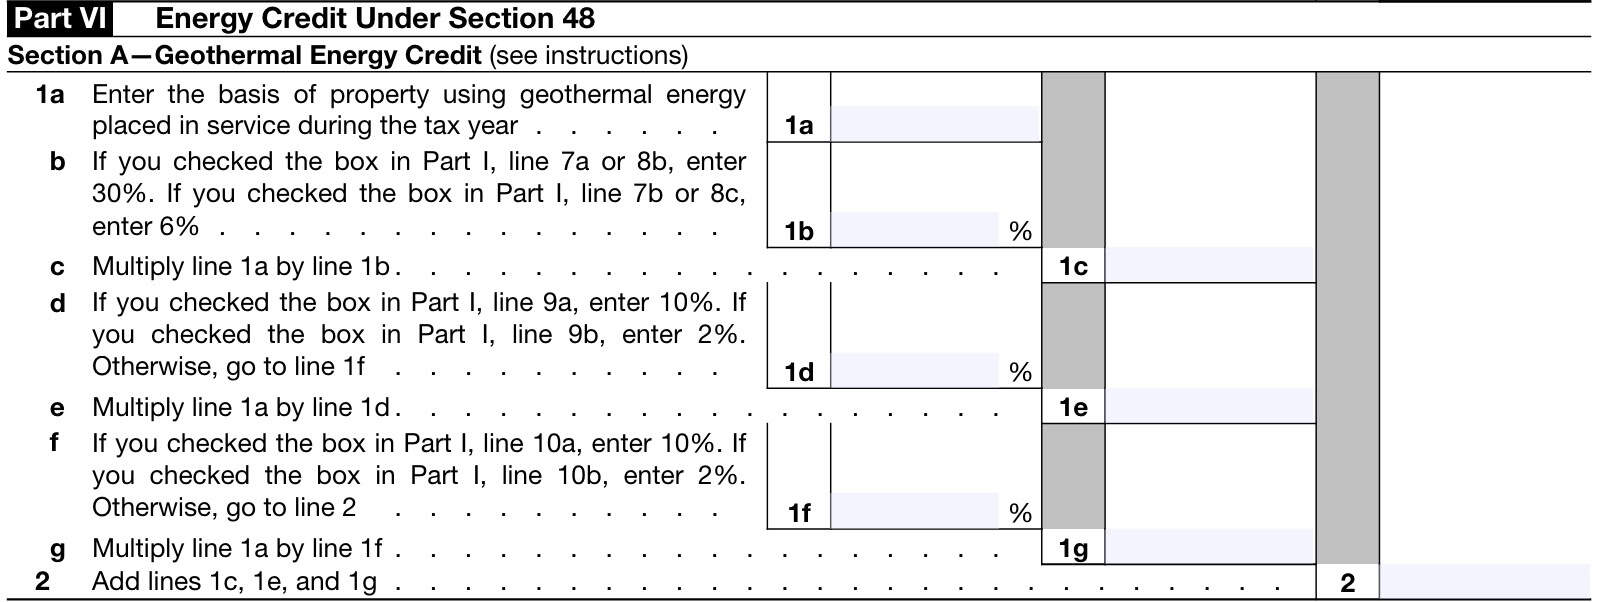 irs form 3468, part vi, section a: geothermal energy credit